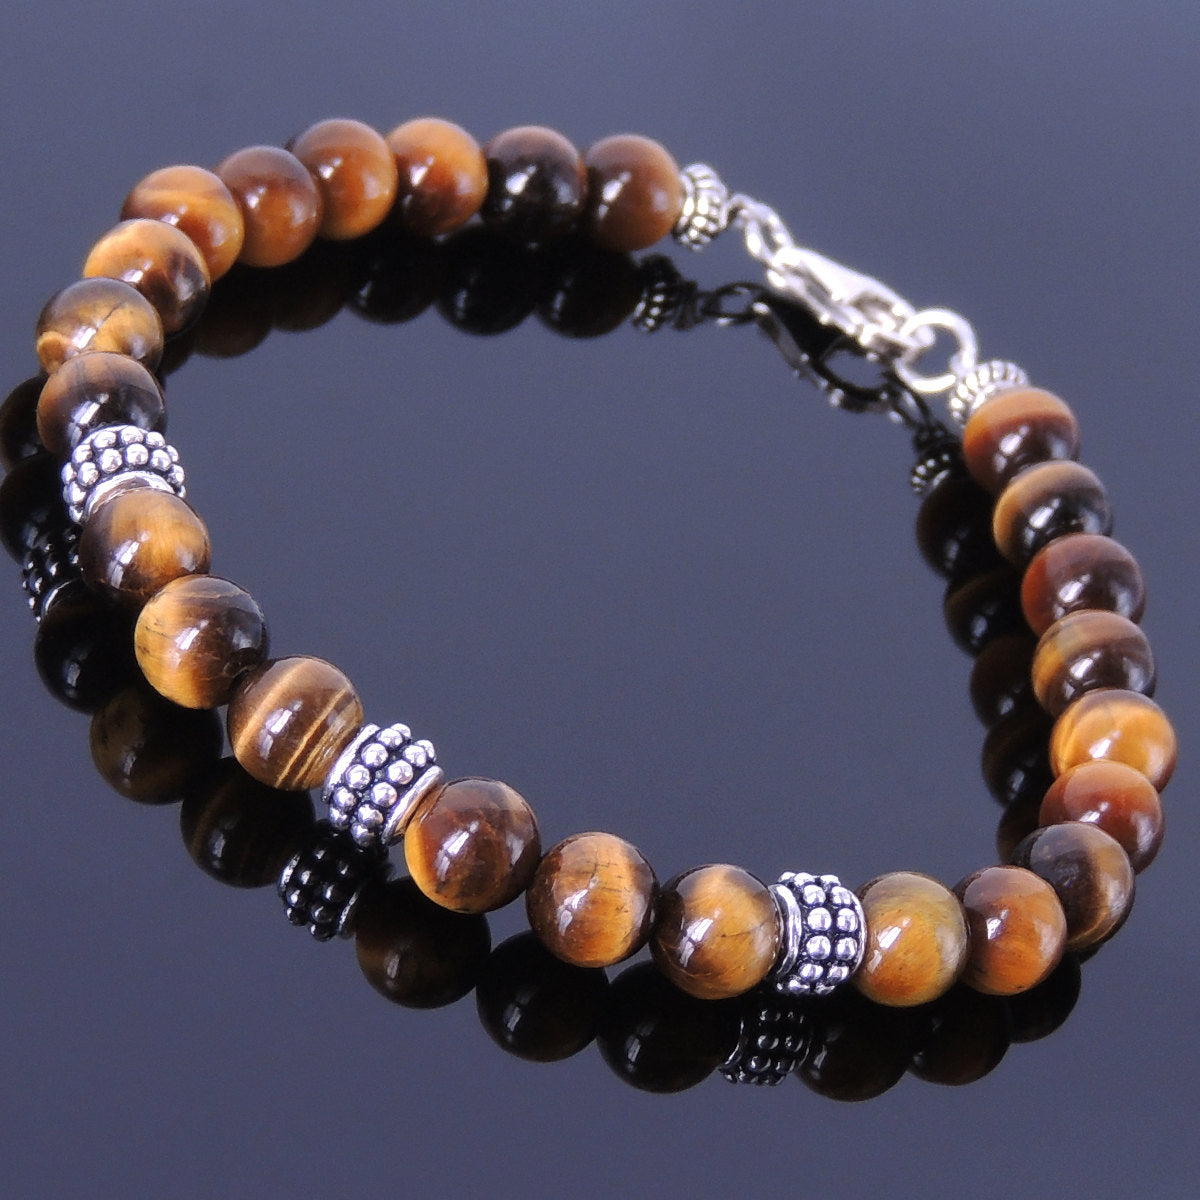 6mm Brown Tiger Eye Healing Stone Bracelet with S925 Sterling Silver Artisan Spacer Beads & Clasp - Handmade by Gem & Silver BR368